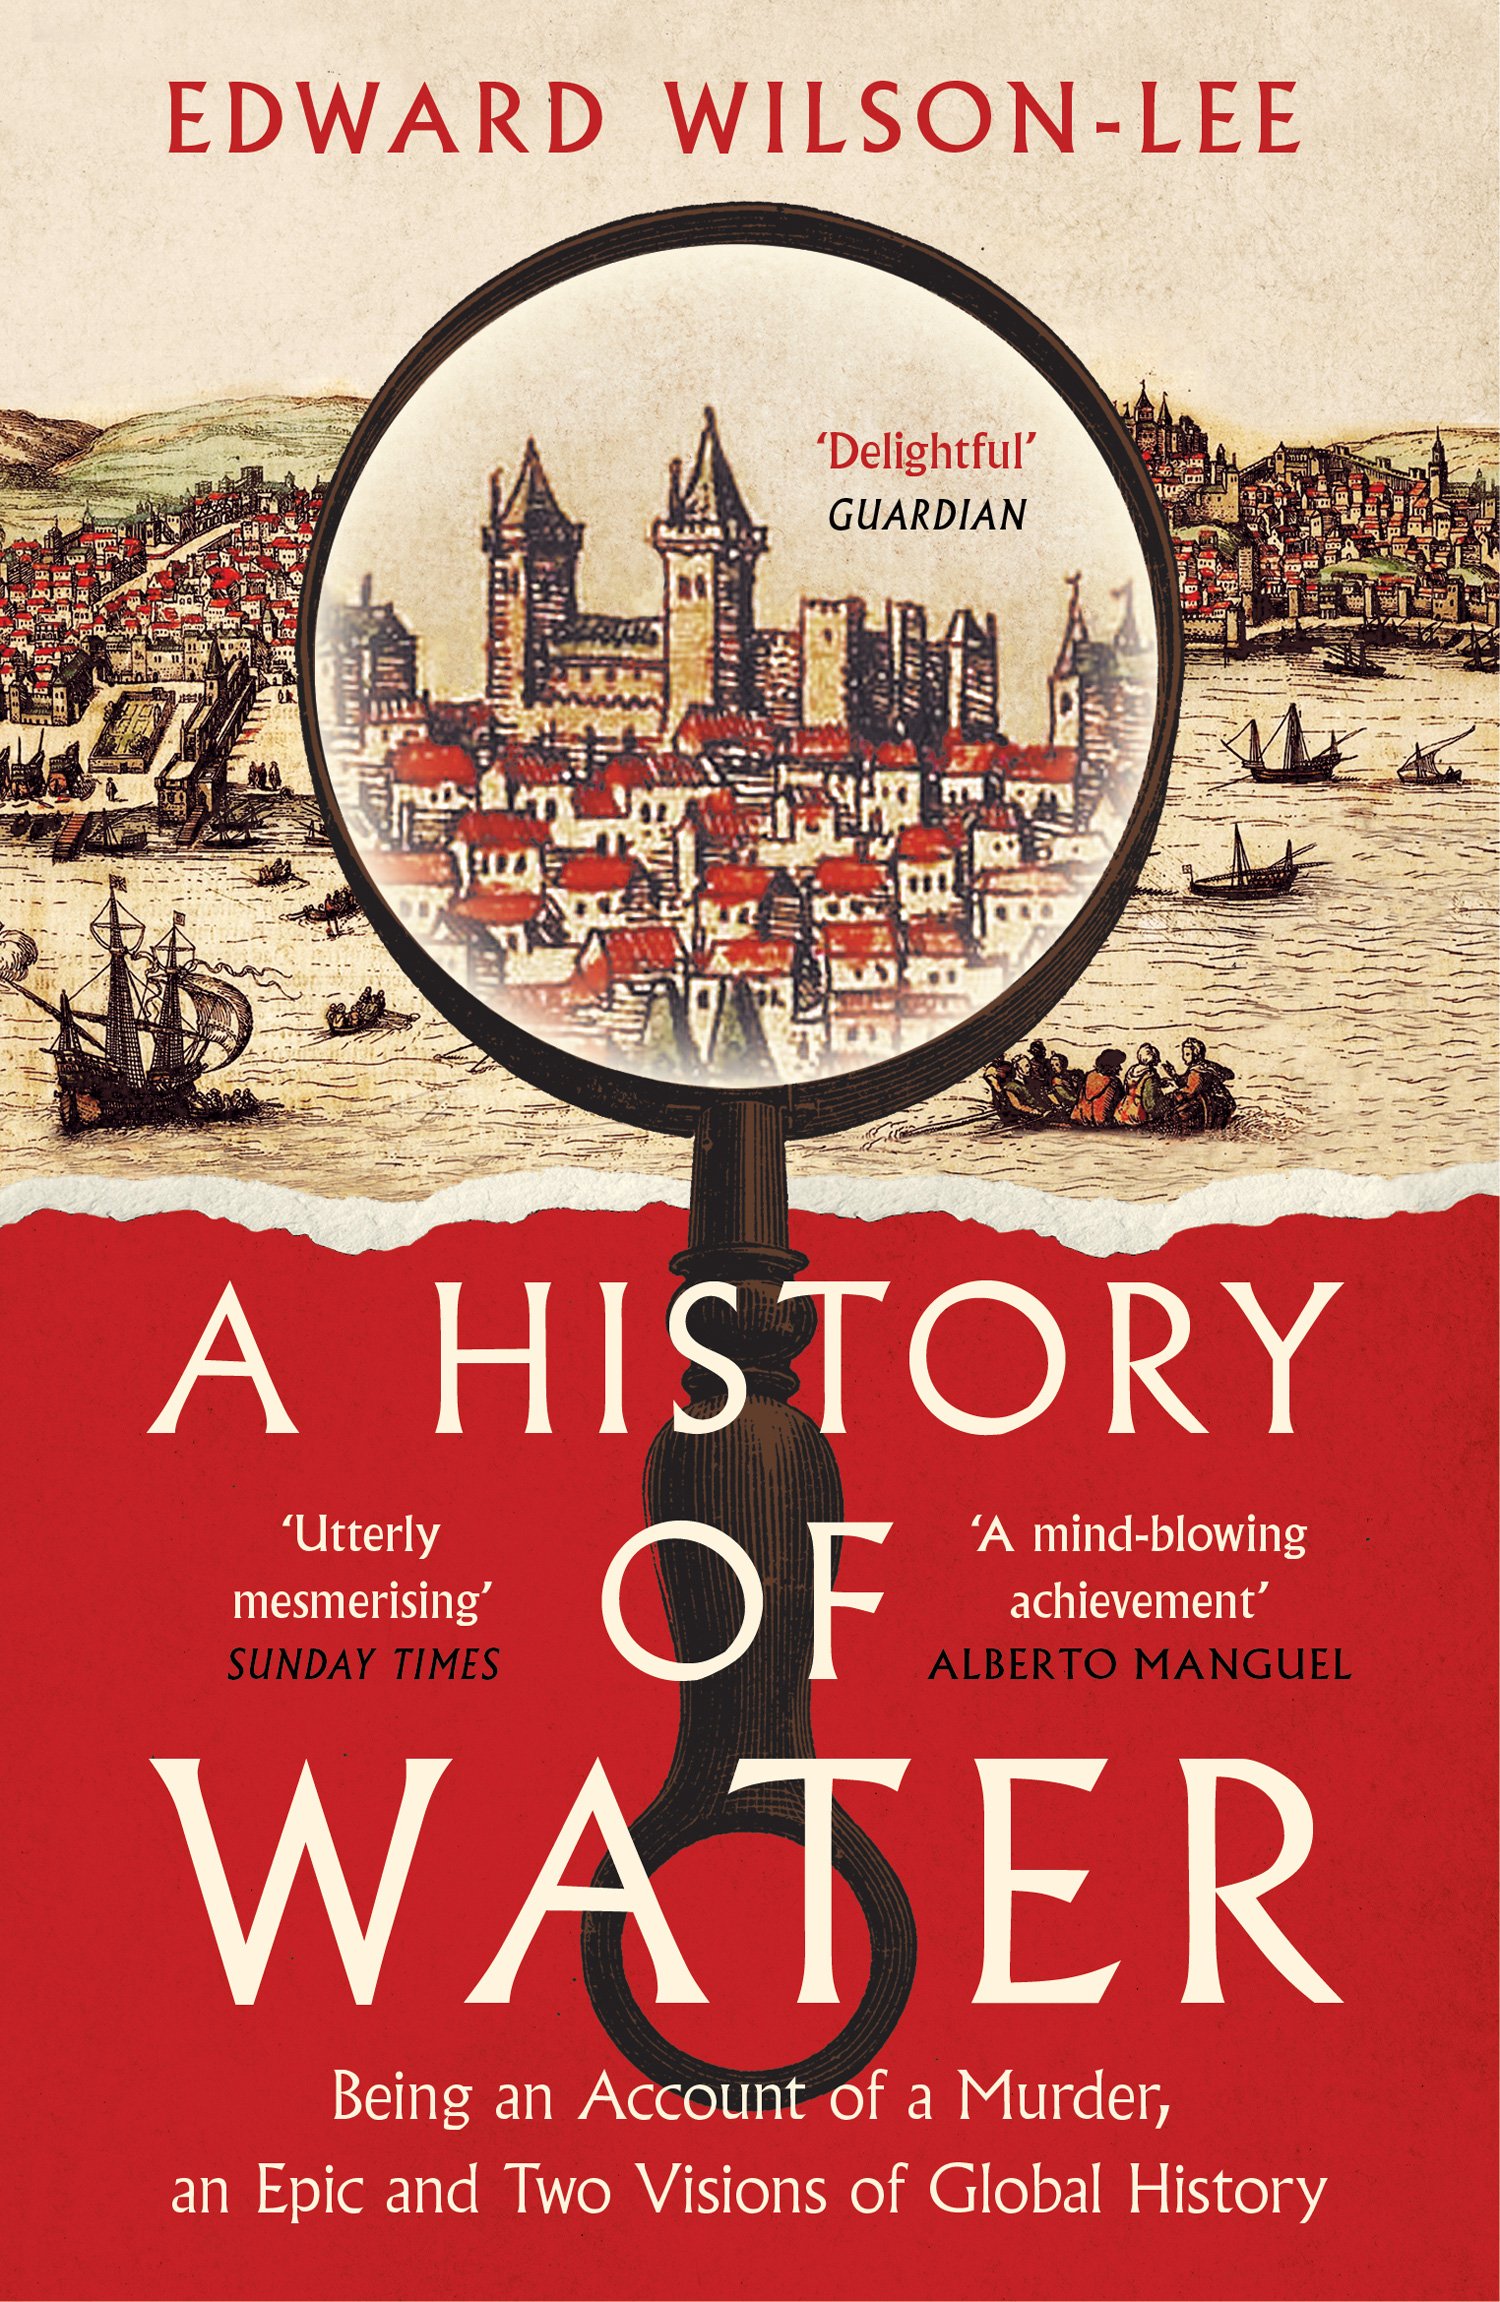 A HISTORY OF WATER - WILSON-LEE, Edward - UK, William Collins - PB cover, FRONT - FINAL.jpg